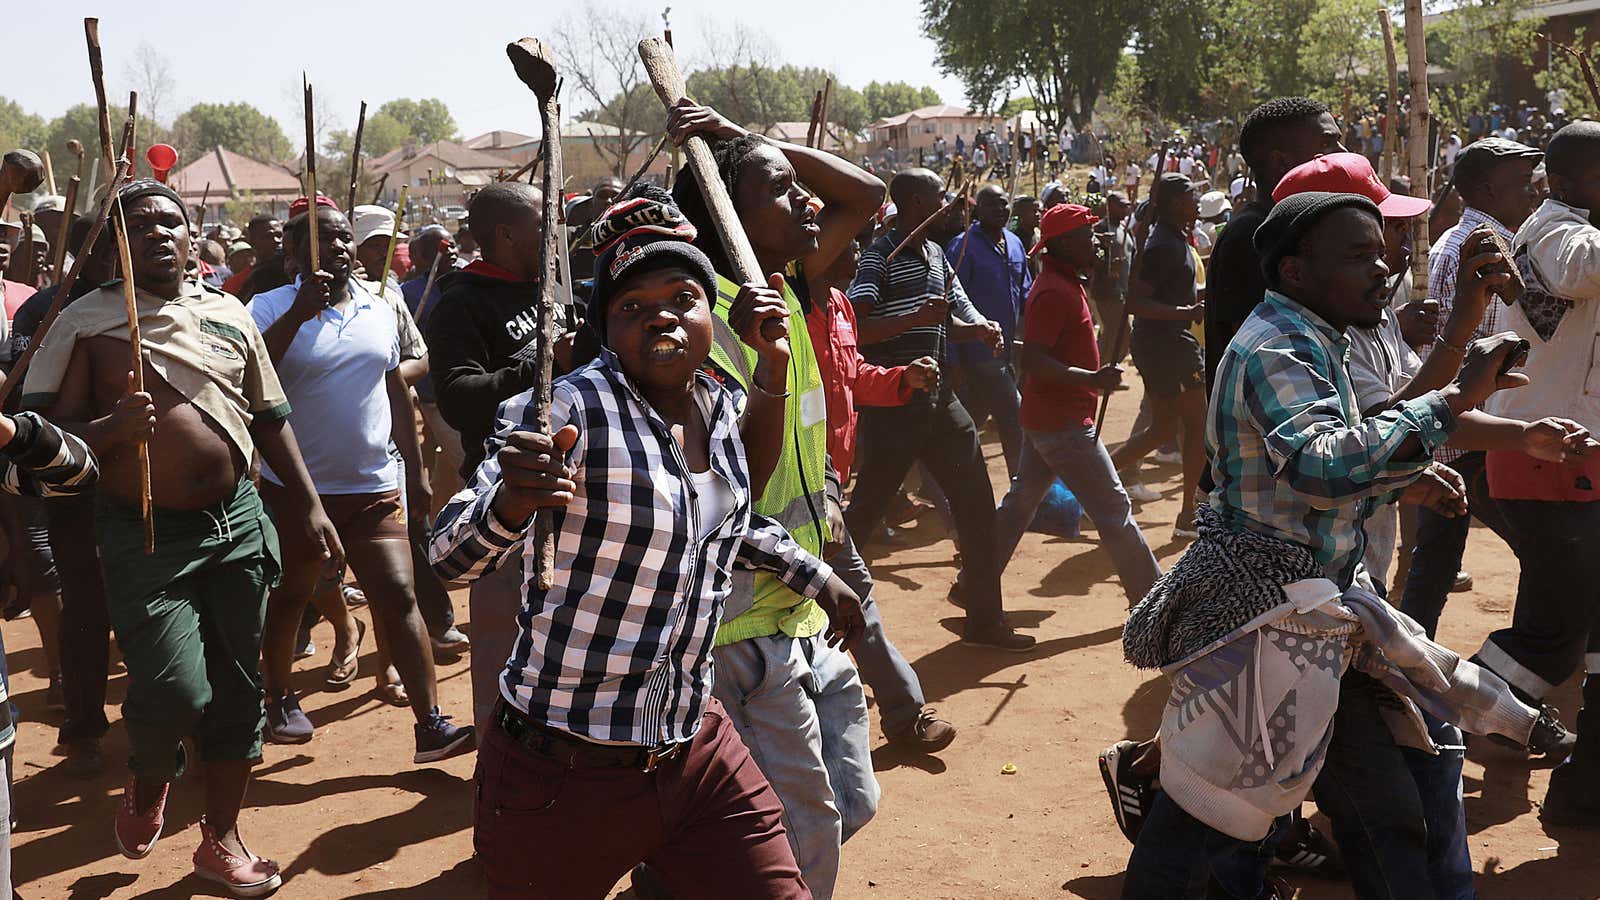 Residents of local hostels march with homemade weapons in Johannesburg. South African police say that two more people have been killed in Johannesburg, bringing to 12 the number of deaths